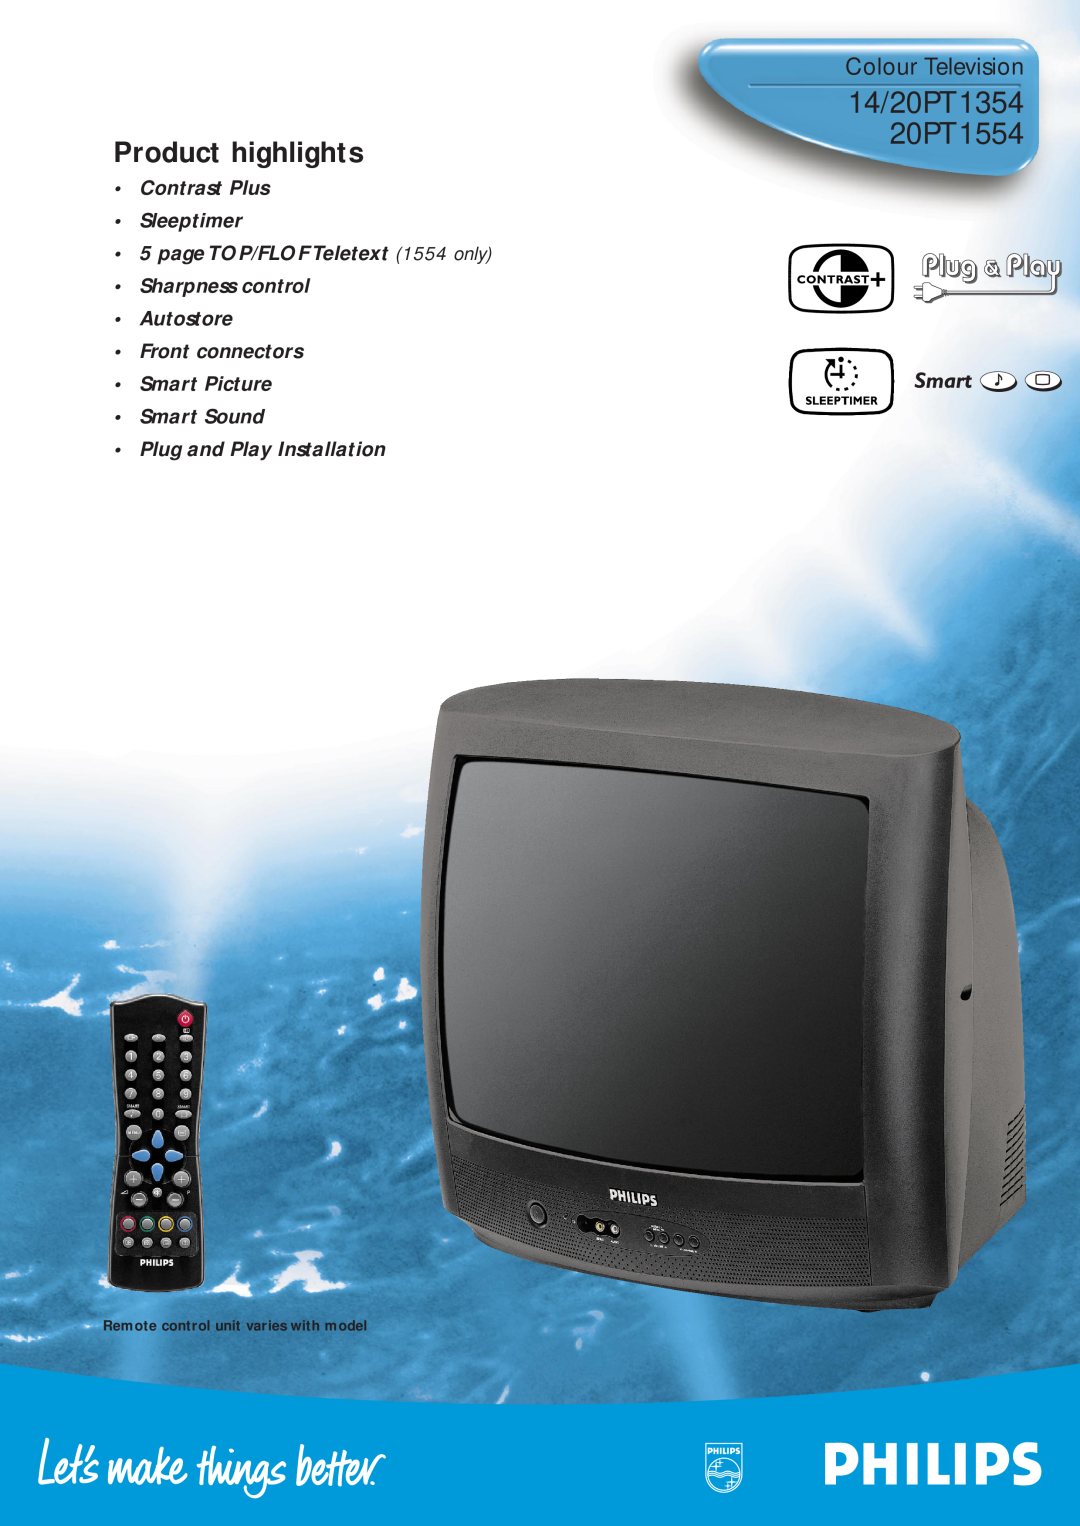 Philips manual 14/20PT1354 20PT1554, Product highlights, Colour Television, Smart Sound Plug and Play Installation 